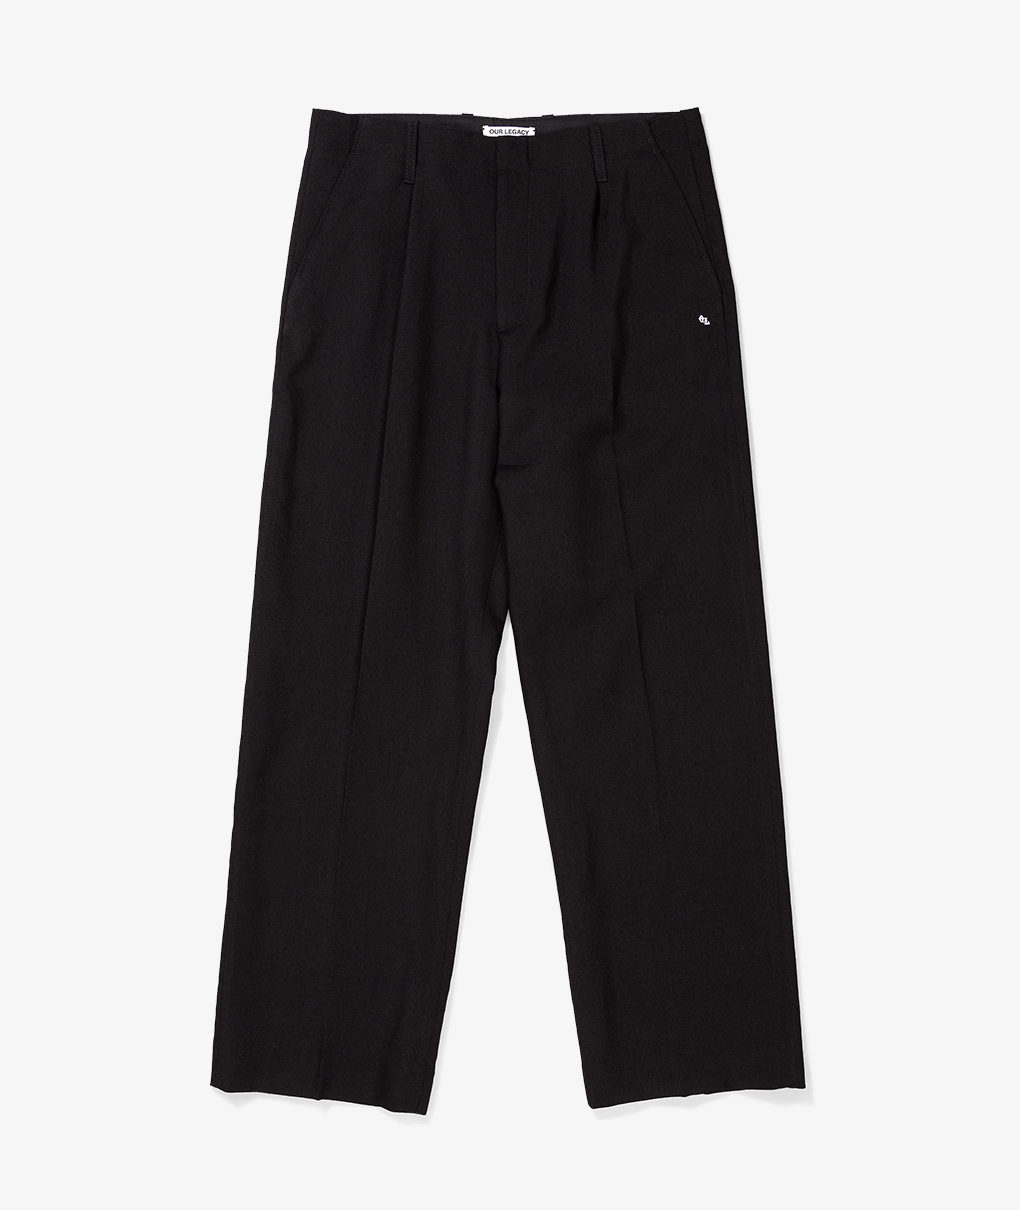 Norse Store | Shipping Worldwide - Our Legacy BORROWED CHINO - Black